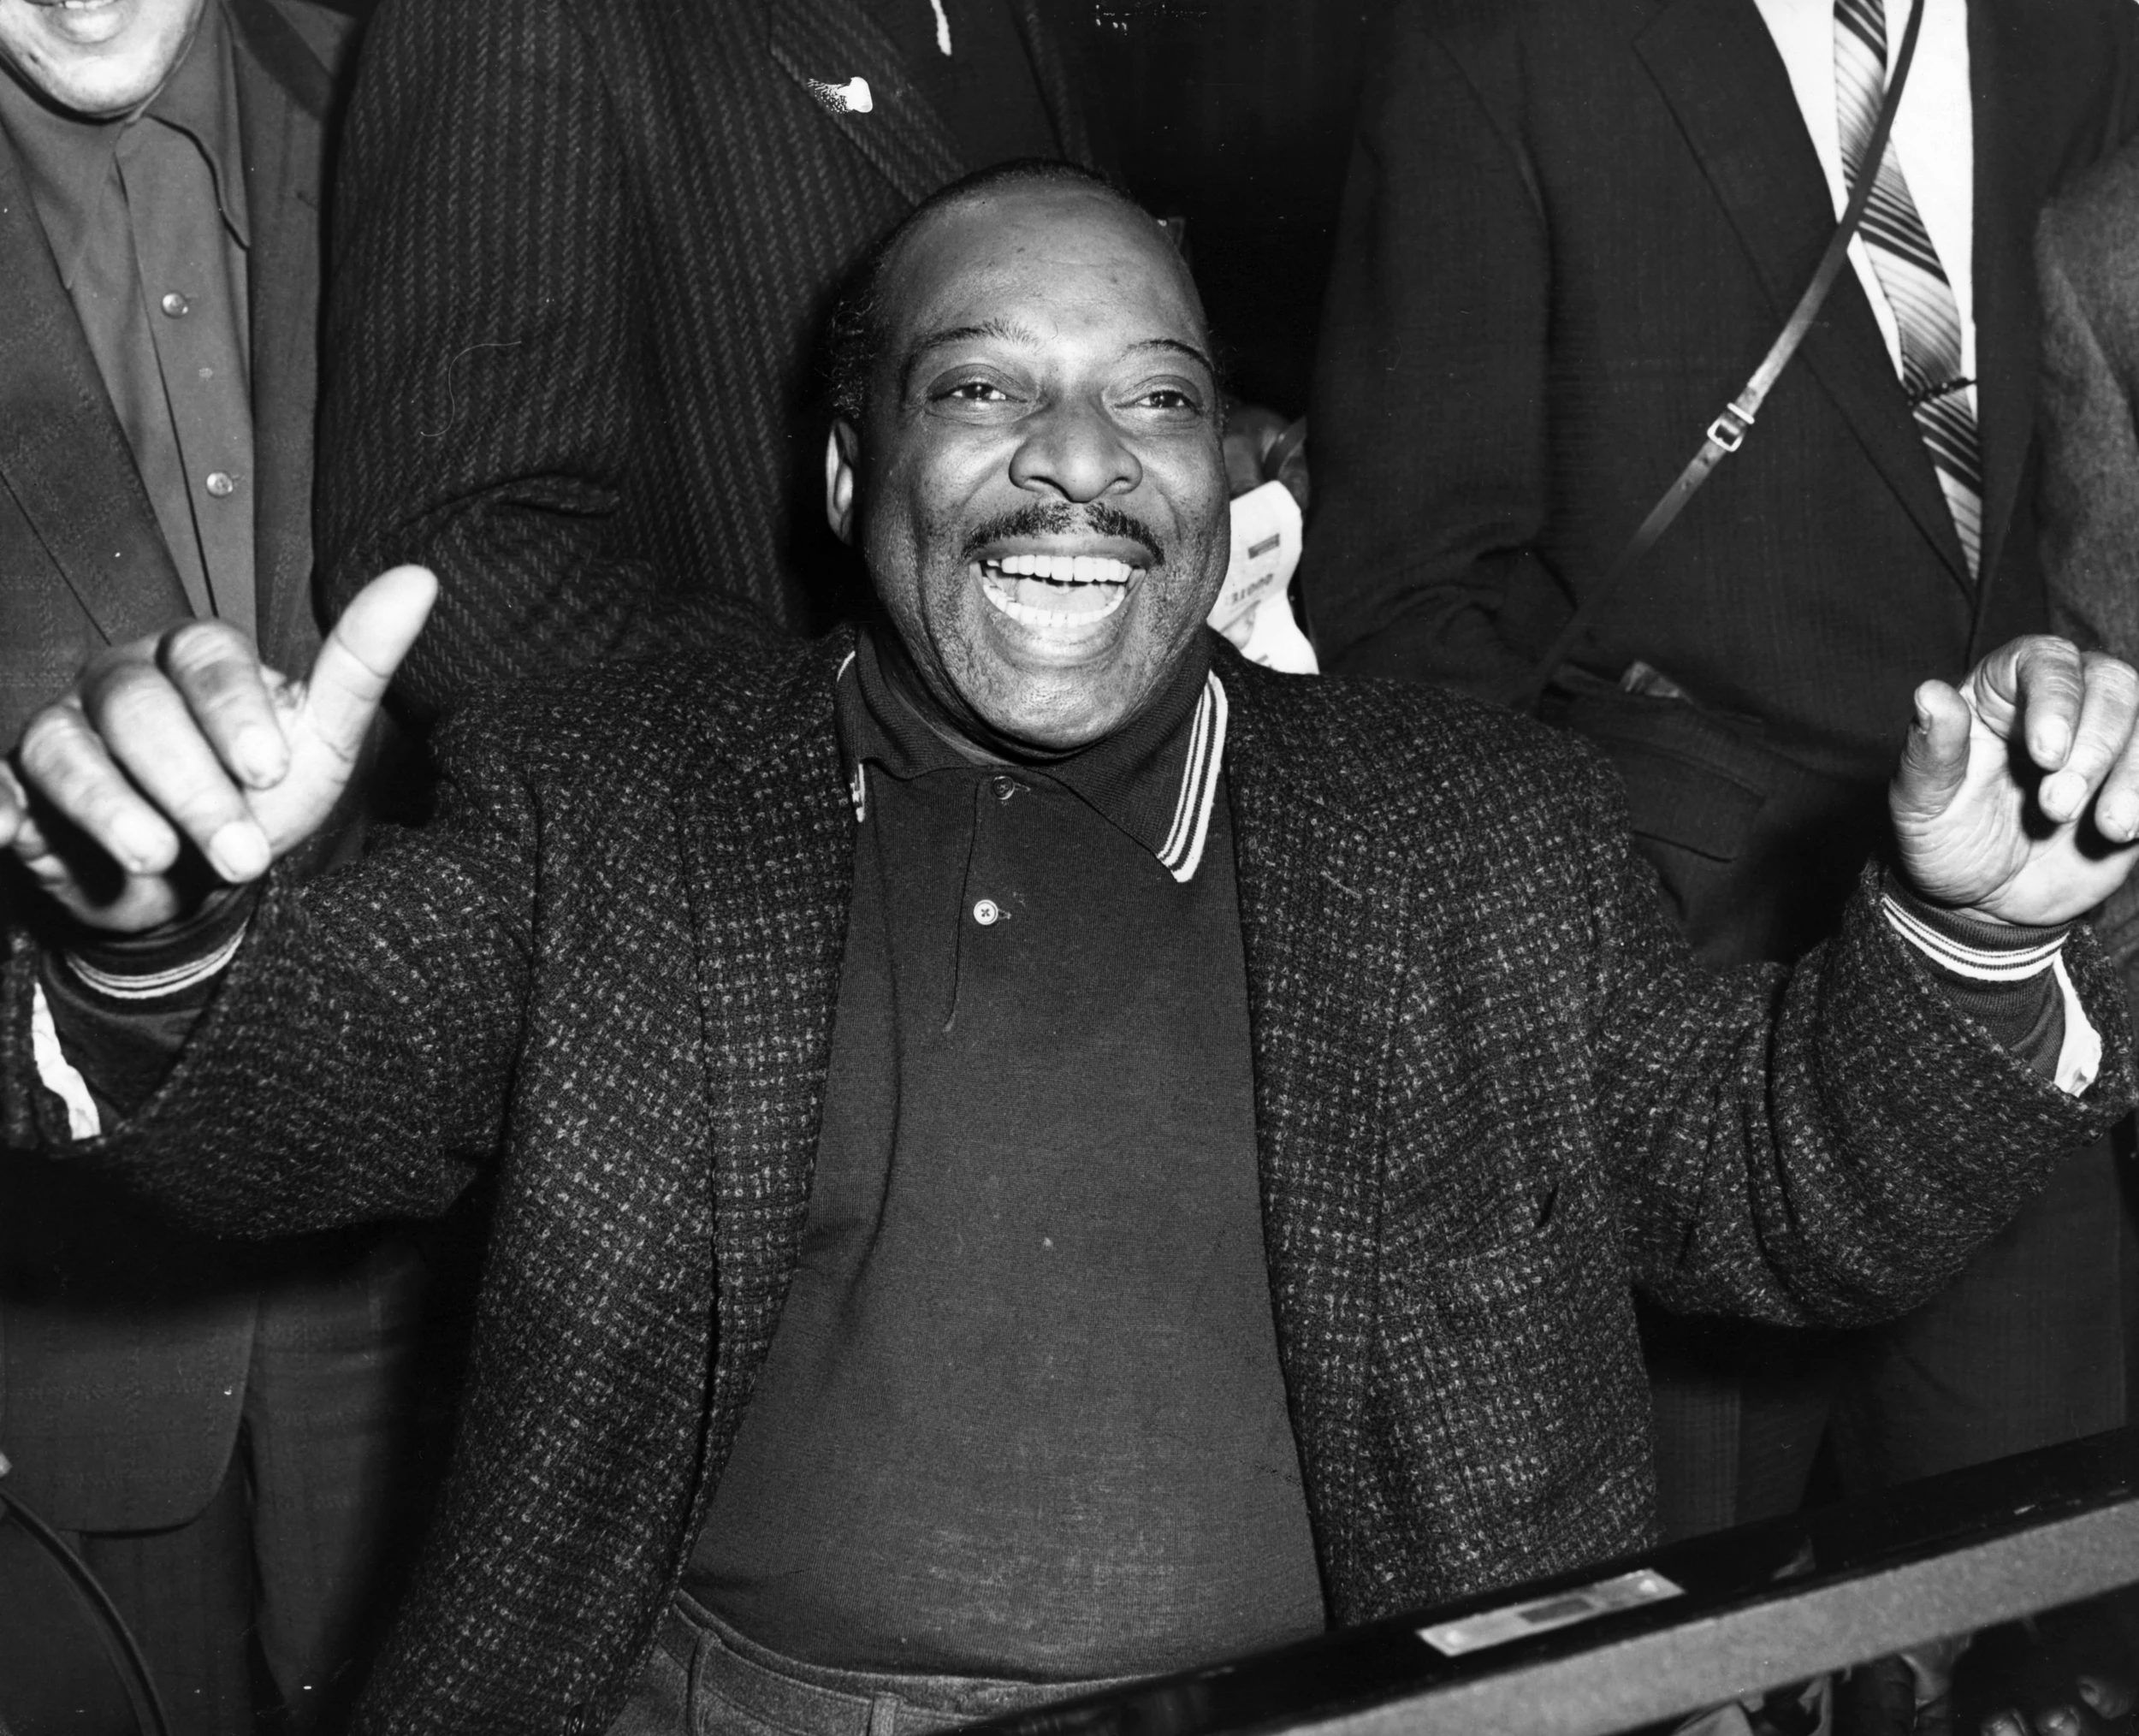 The story of Count Basie, a Jersey original